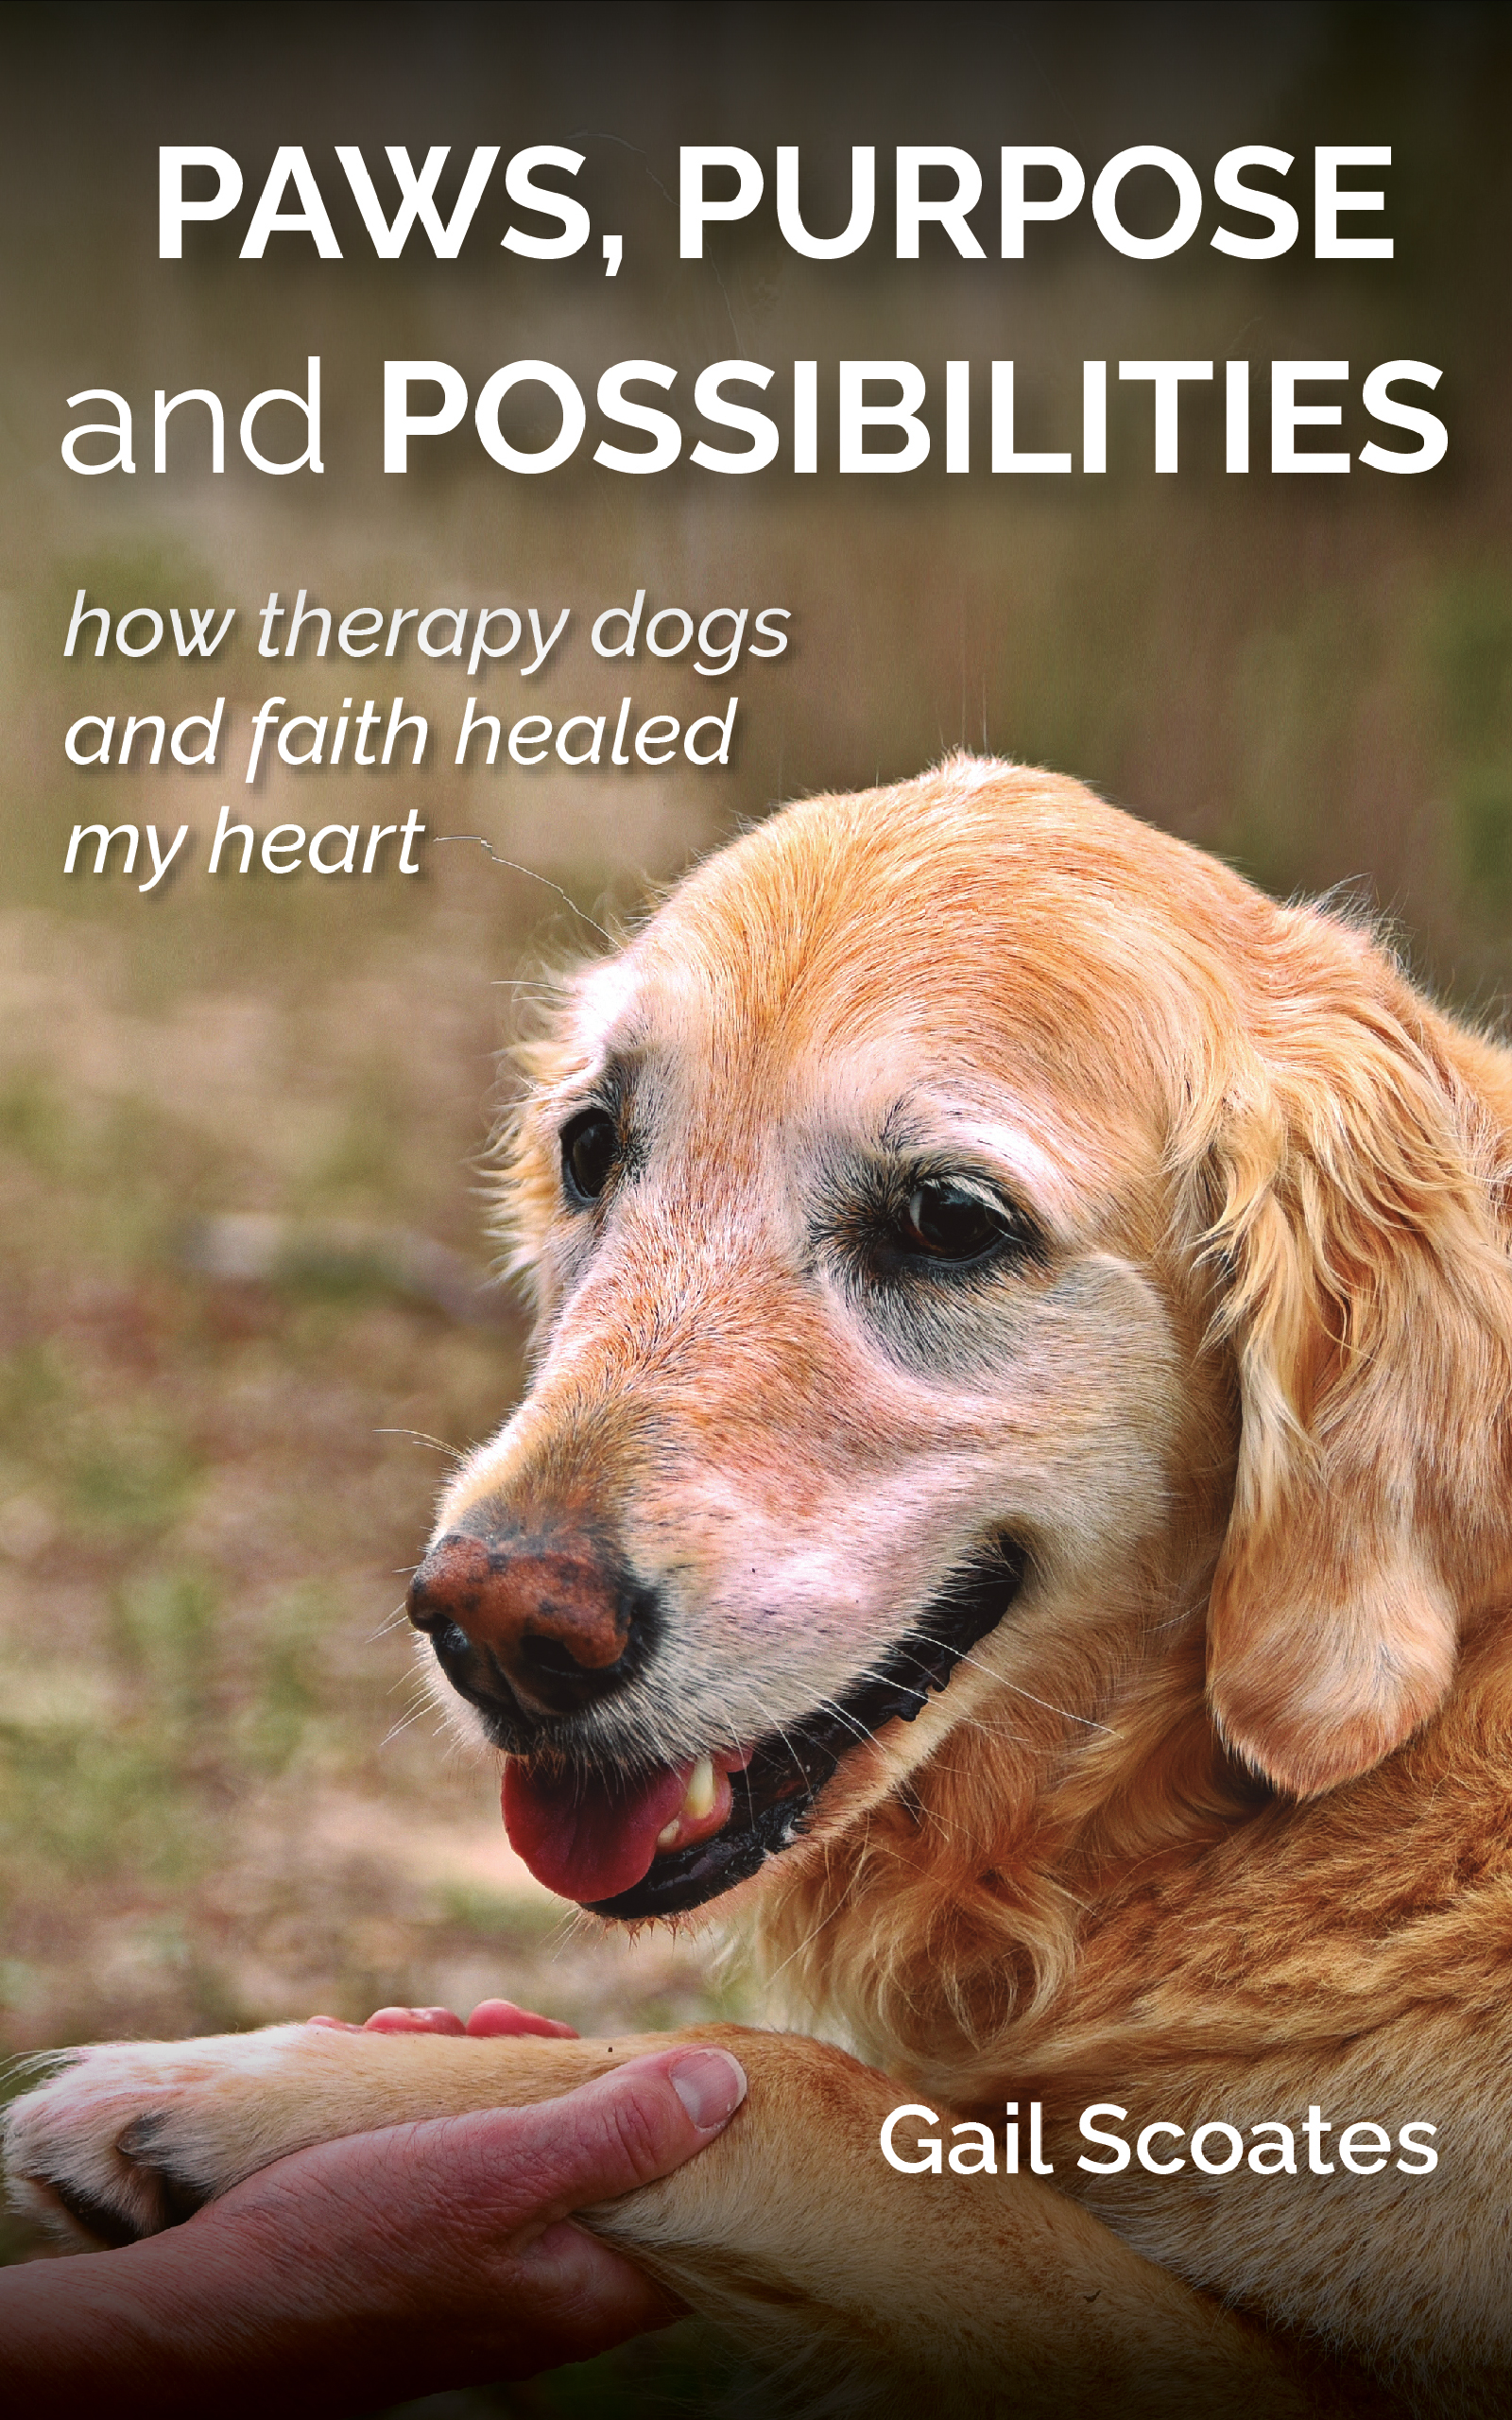 Meet a local author & therapy dog proponent at Chapter 52 in October